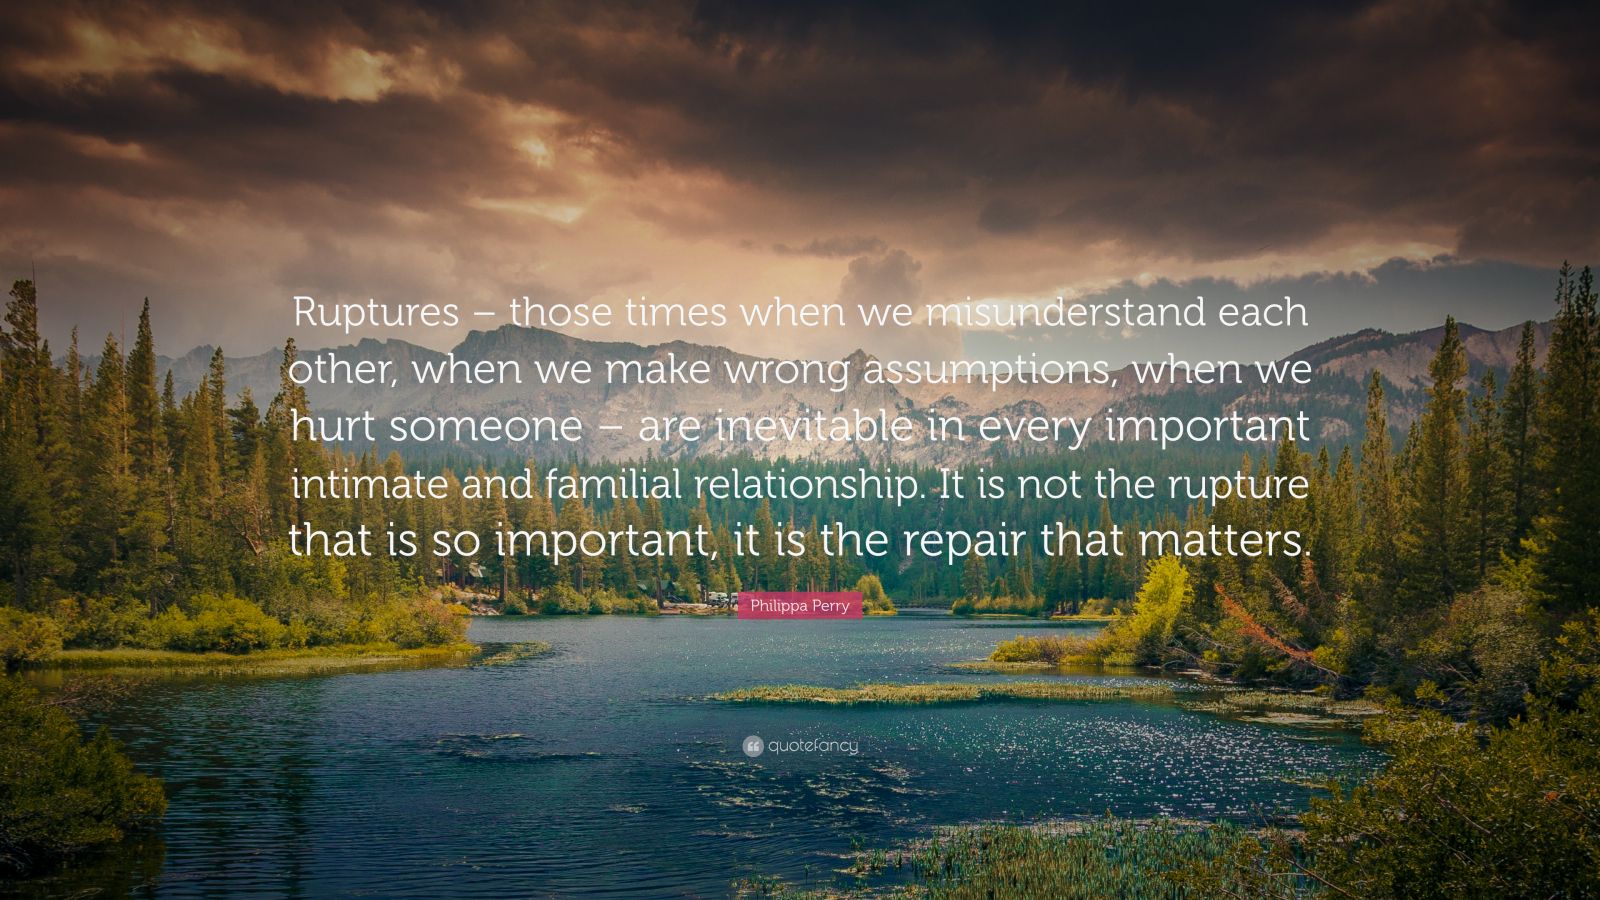 Philippa Perry Quote: “Ruptures – those times when we misunderstand ...